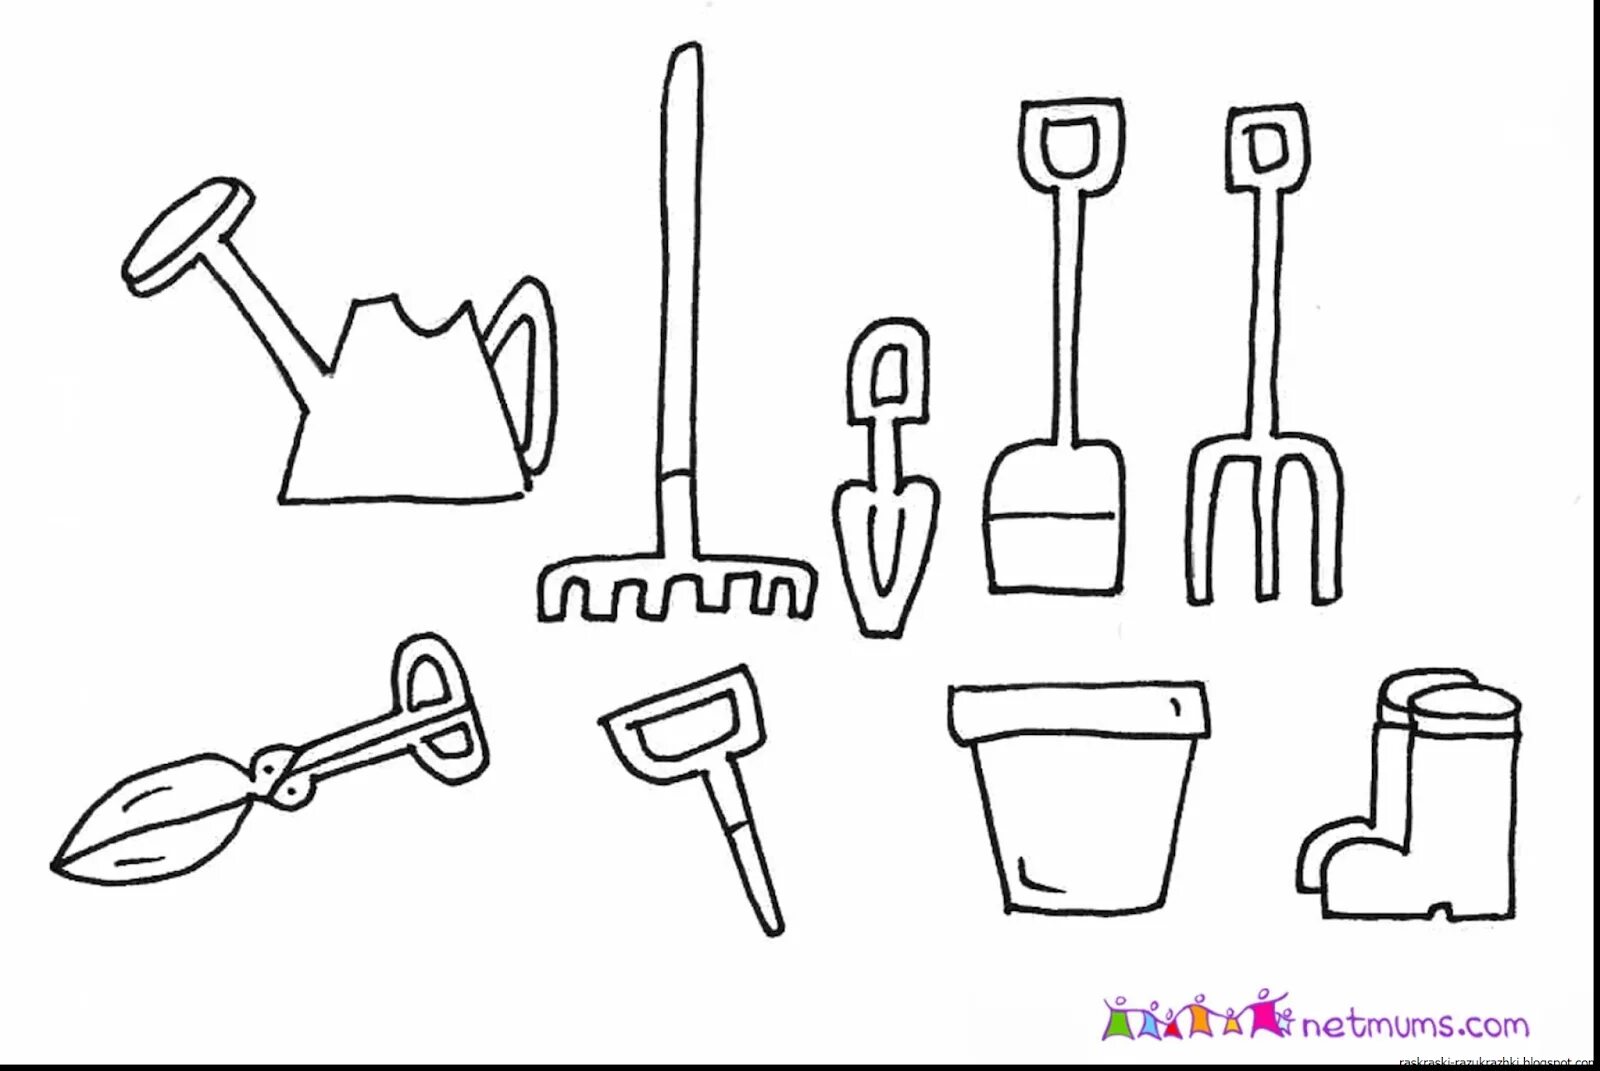 Exciting preschool tool coloring page